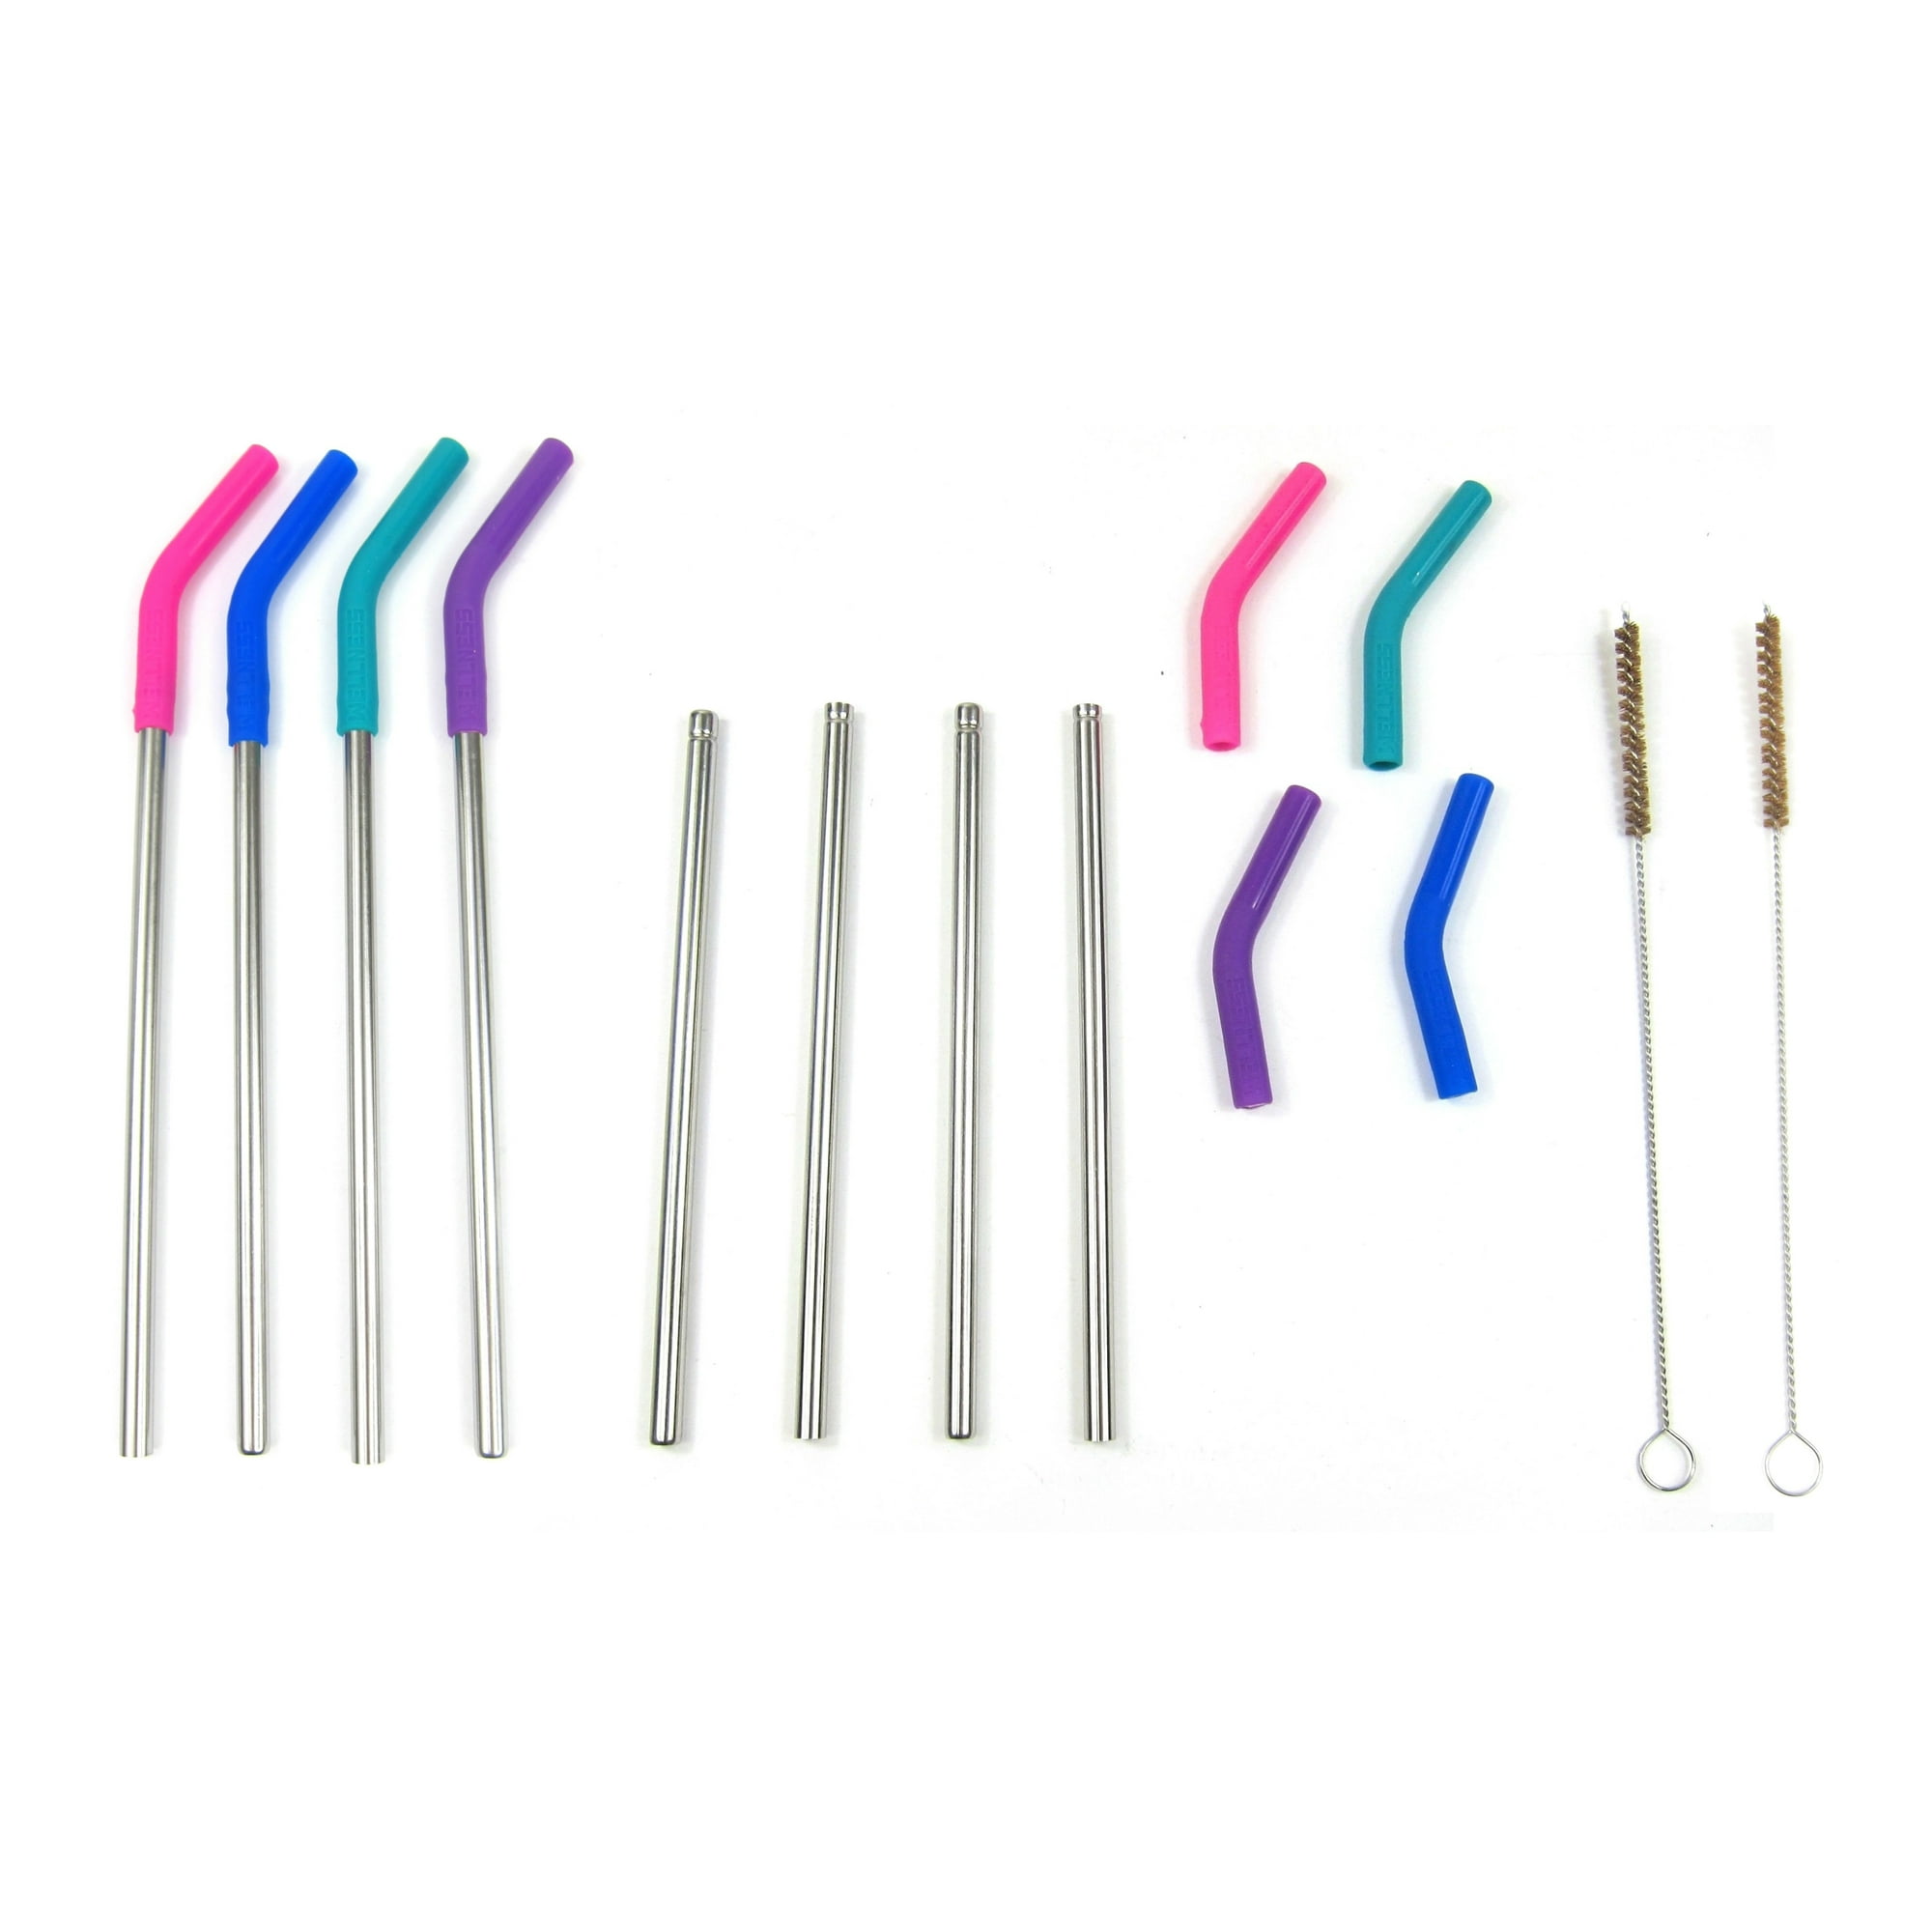 Set of Stainless Steel Metal Reusable Straws Silicone Tips Cleaning Brush 10.5"